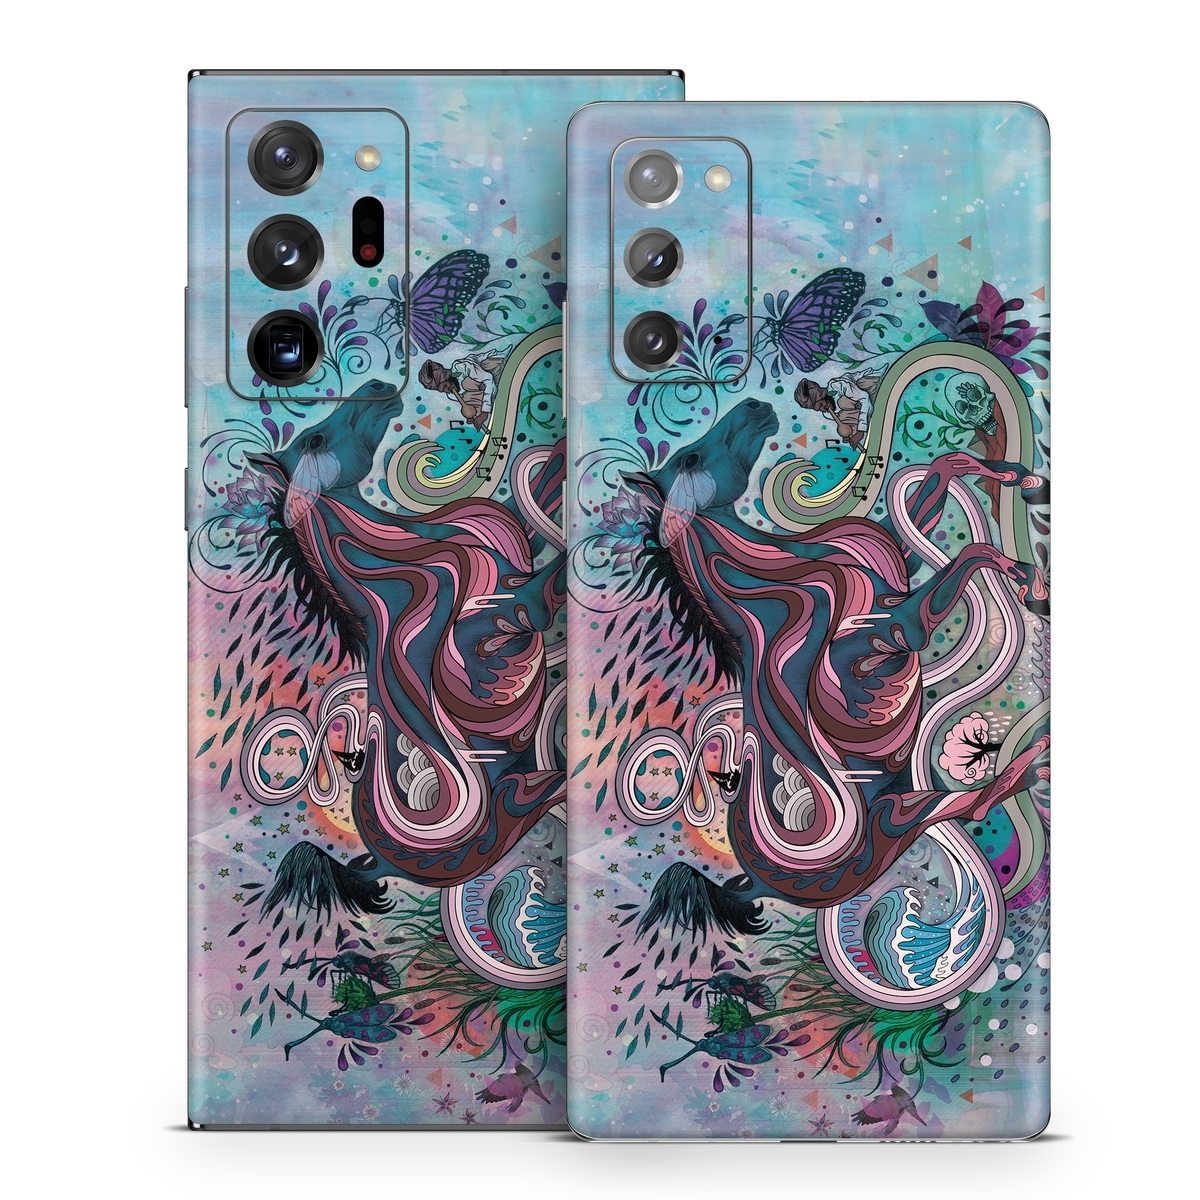 Samsung Galaxy Note 20 Skin design of Illustration, Art, Visual arts, Graphic design, Fictional character, Psychedelic art, Pattern, Drawing, Painting, Mythology, with gray, black, blue, red, purple colors